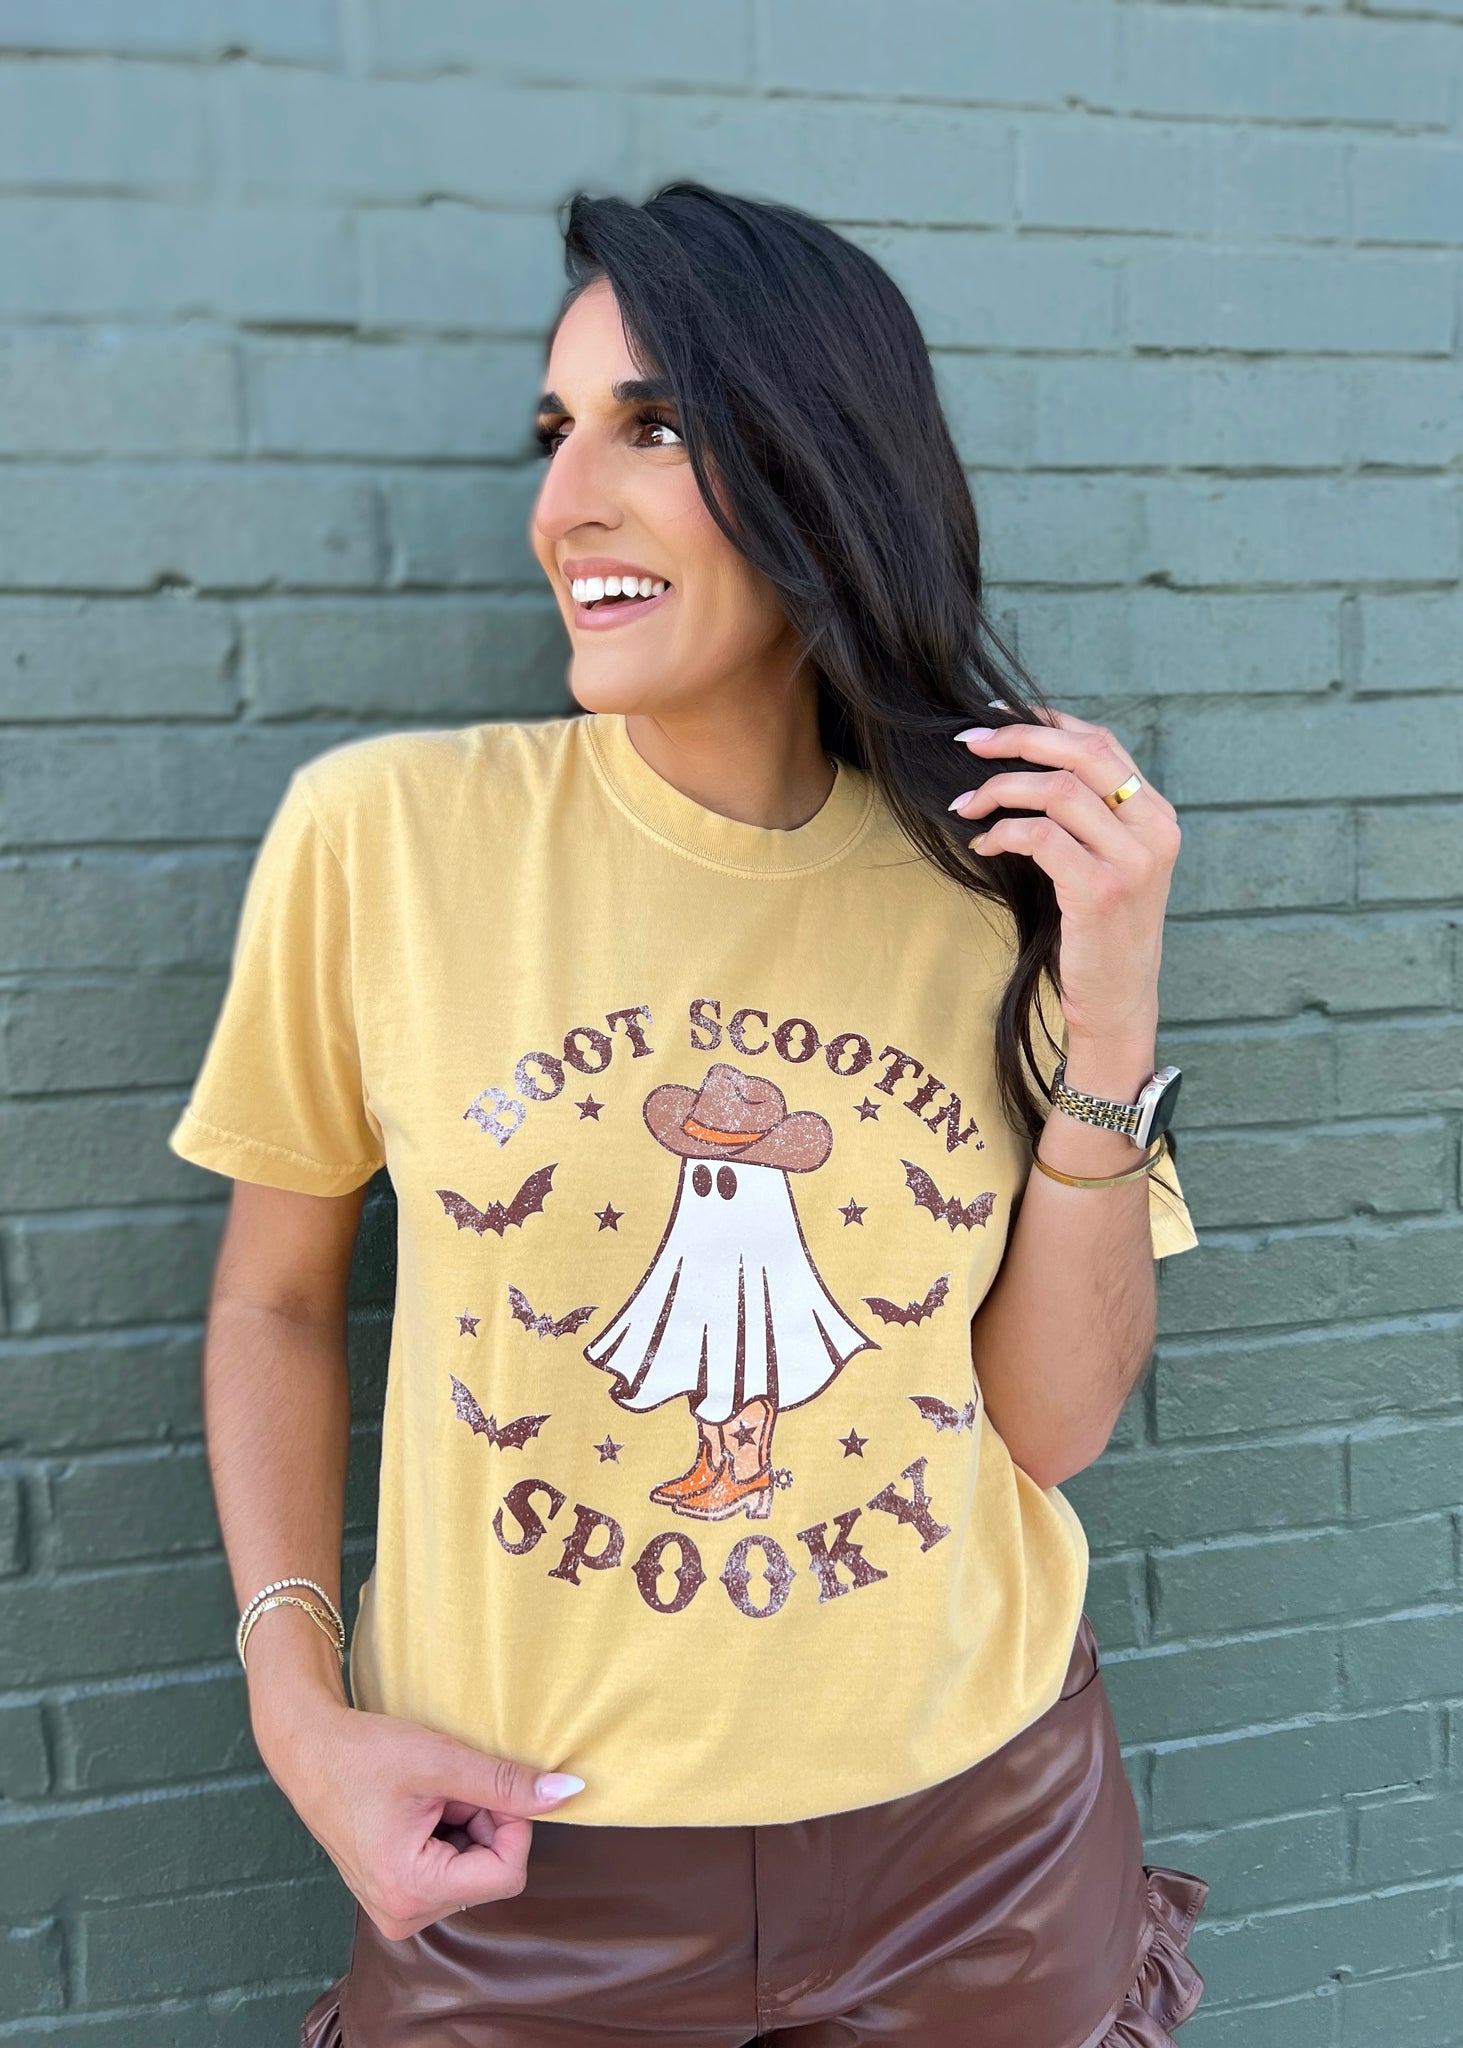 Boot Scooting Spooky Retro Ghost Tee - Mustard